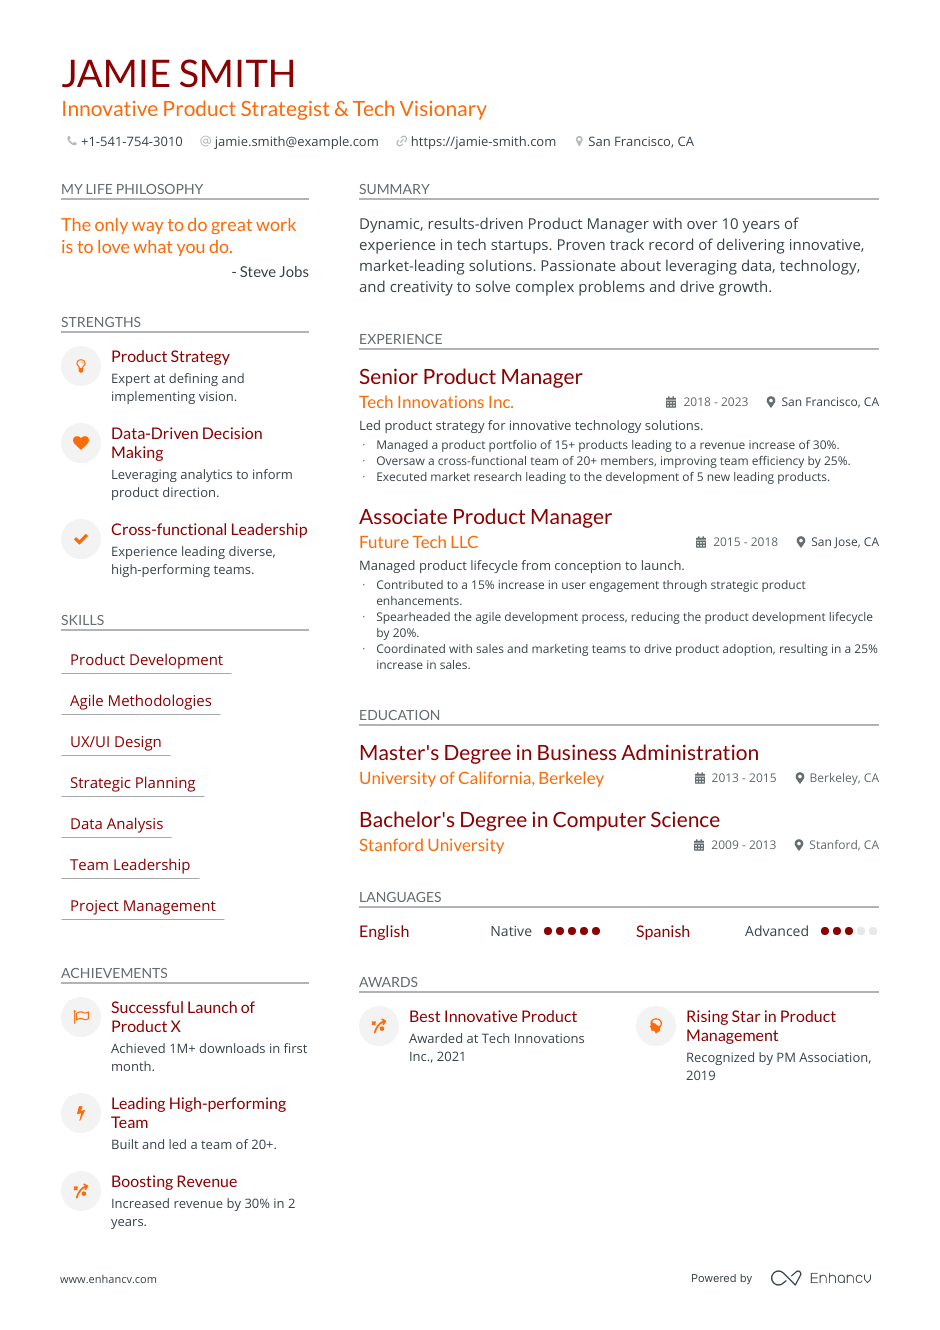 Innovative Product Strategist & Tech Visionary resume example